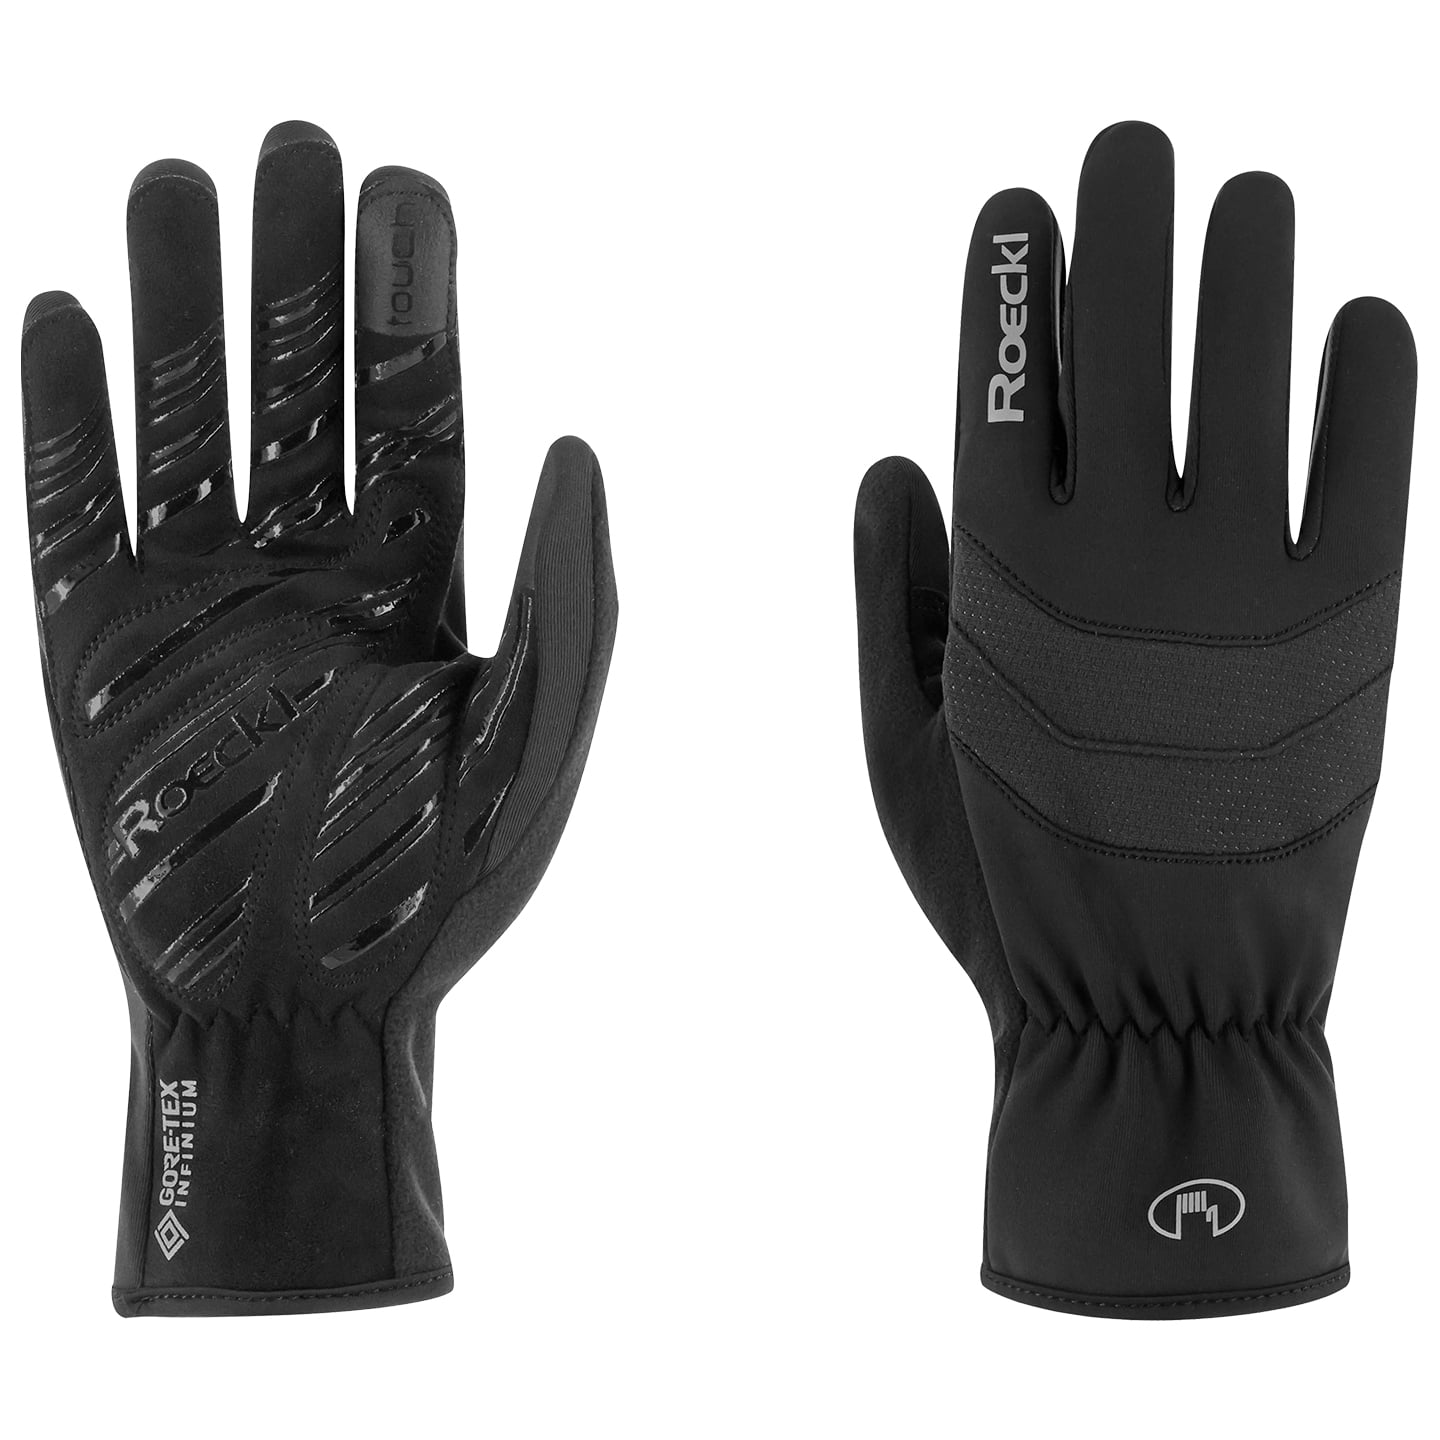 ROECKL Raiano Winter Gloves Winter Cycling Gloves, for men, size 9,5, Bike gloves, Cycling wear